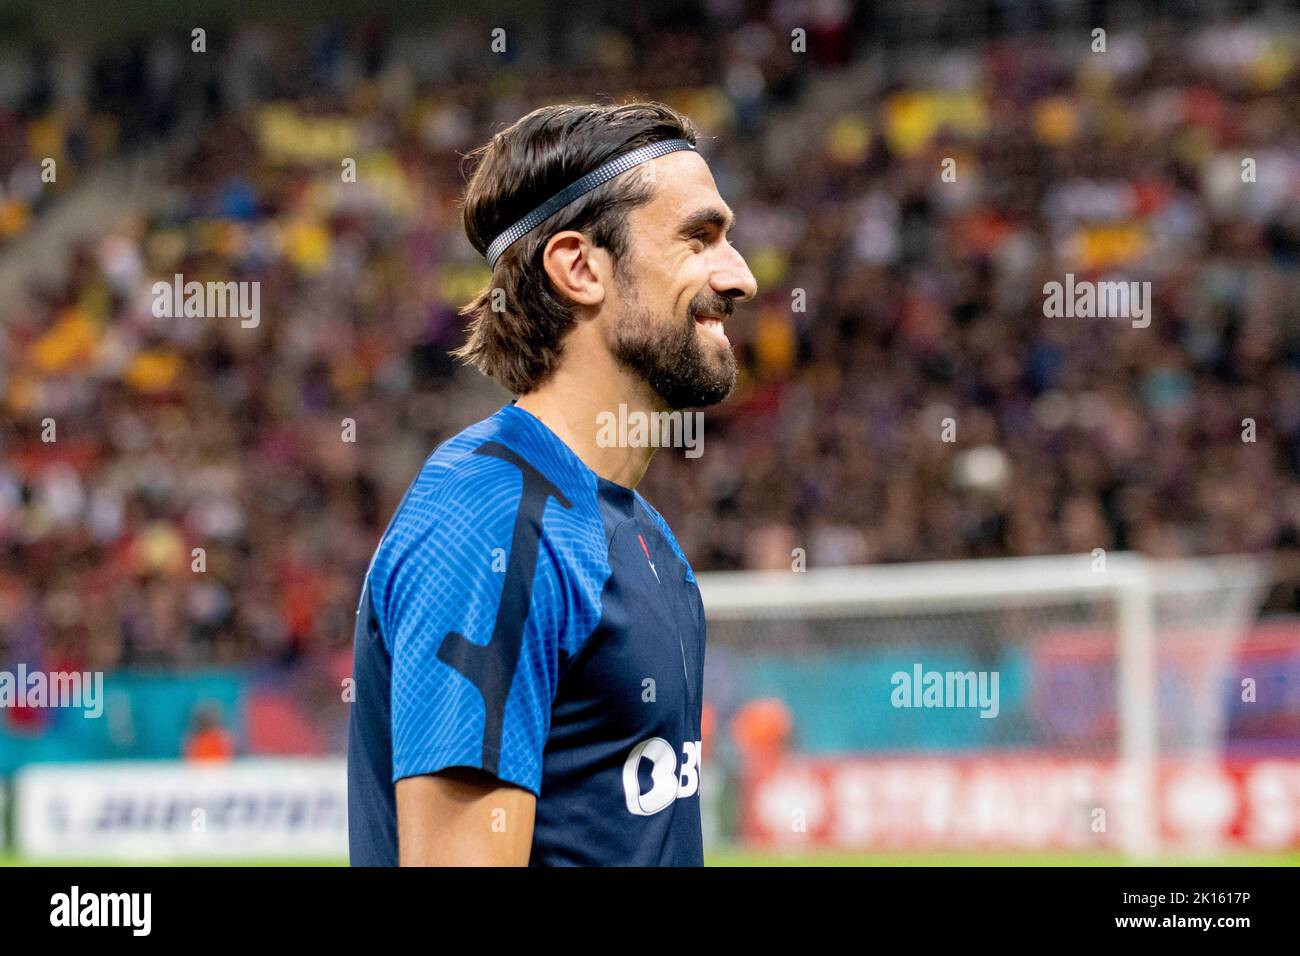 Bucharest, Romania. 16th Sep, 2022. September 16, 2022: AndreaCompagno #96 of FCSB ahead of the UEFA Europa Conference League group B match between FCSB Bucharest and RSC Anderlecht at National Arena Stadium in Bucharest, Romania ROU. Catalin Soare/Cronos Credit: Cronos/Alamy Live News Stock Photo